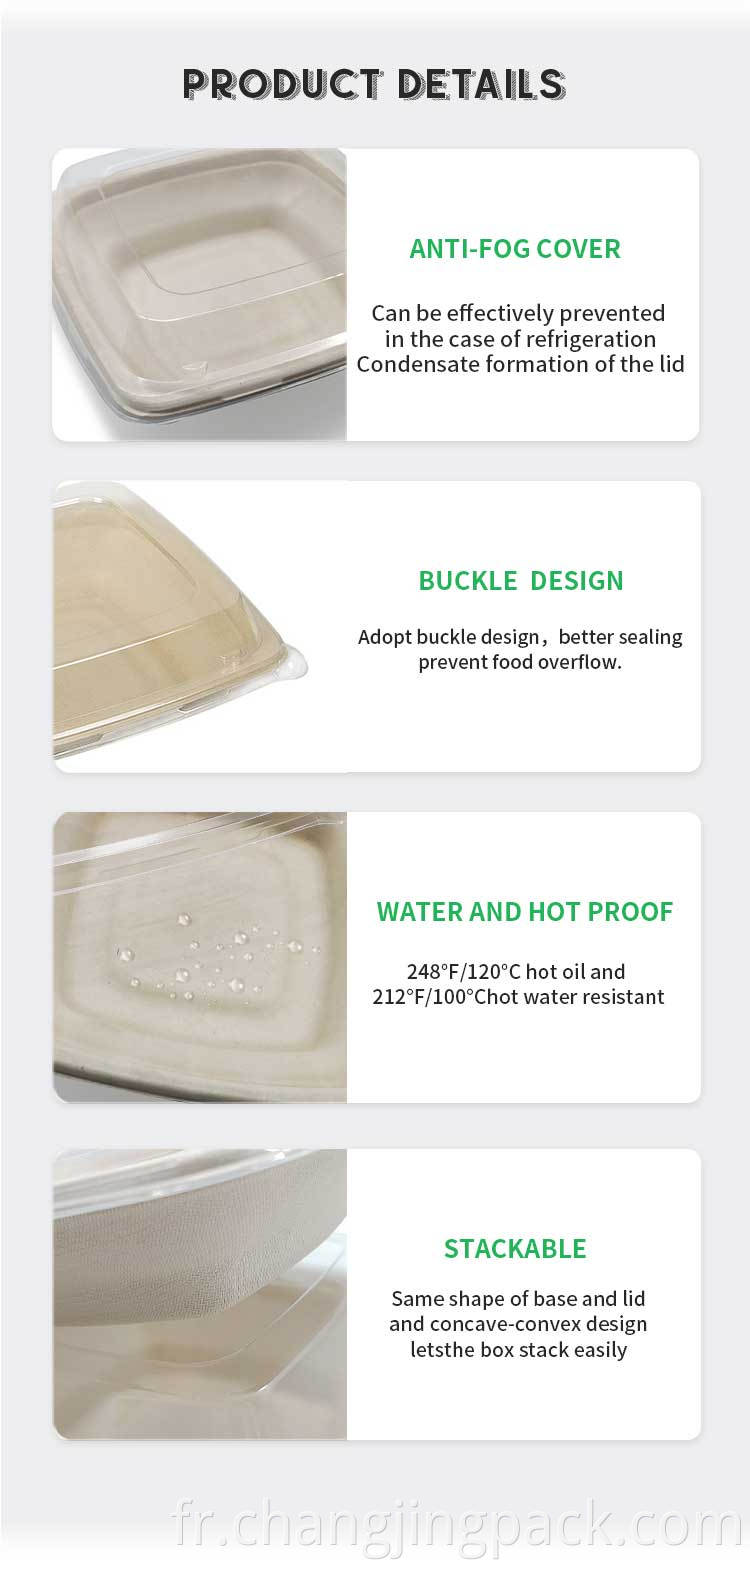  biodegradable plastic containers